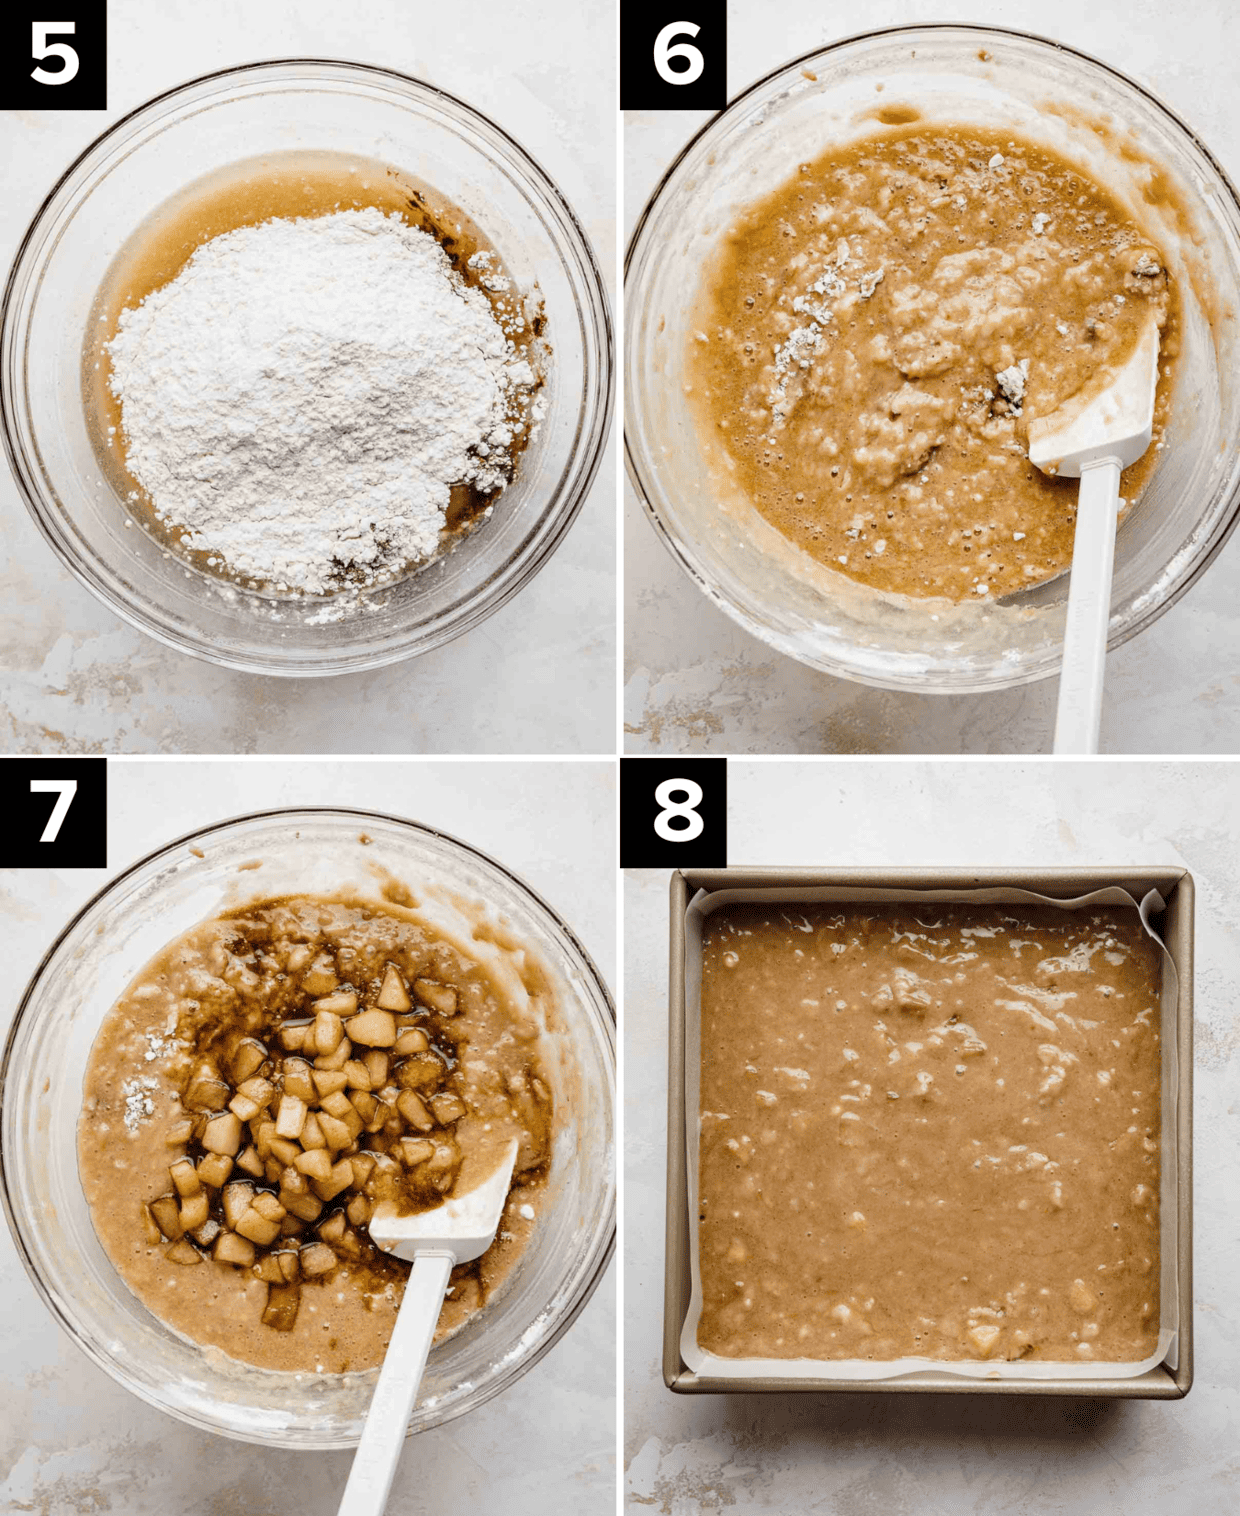 Four photos showing process of making Apple Fritter Cake, top left is glass bowl with flour in it, top right tis Apple Fritter Cake batter in glass bowl, bottom left is cooked diced apples in glass bowl, bottom right is square pan filled with Apple Fritter Cake batter.